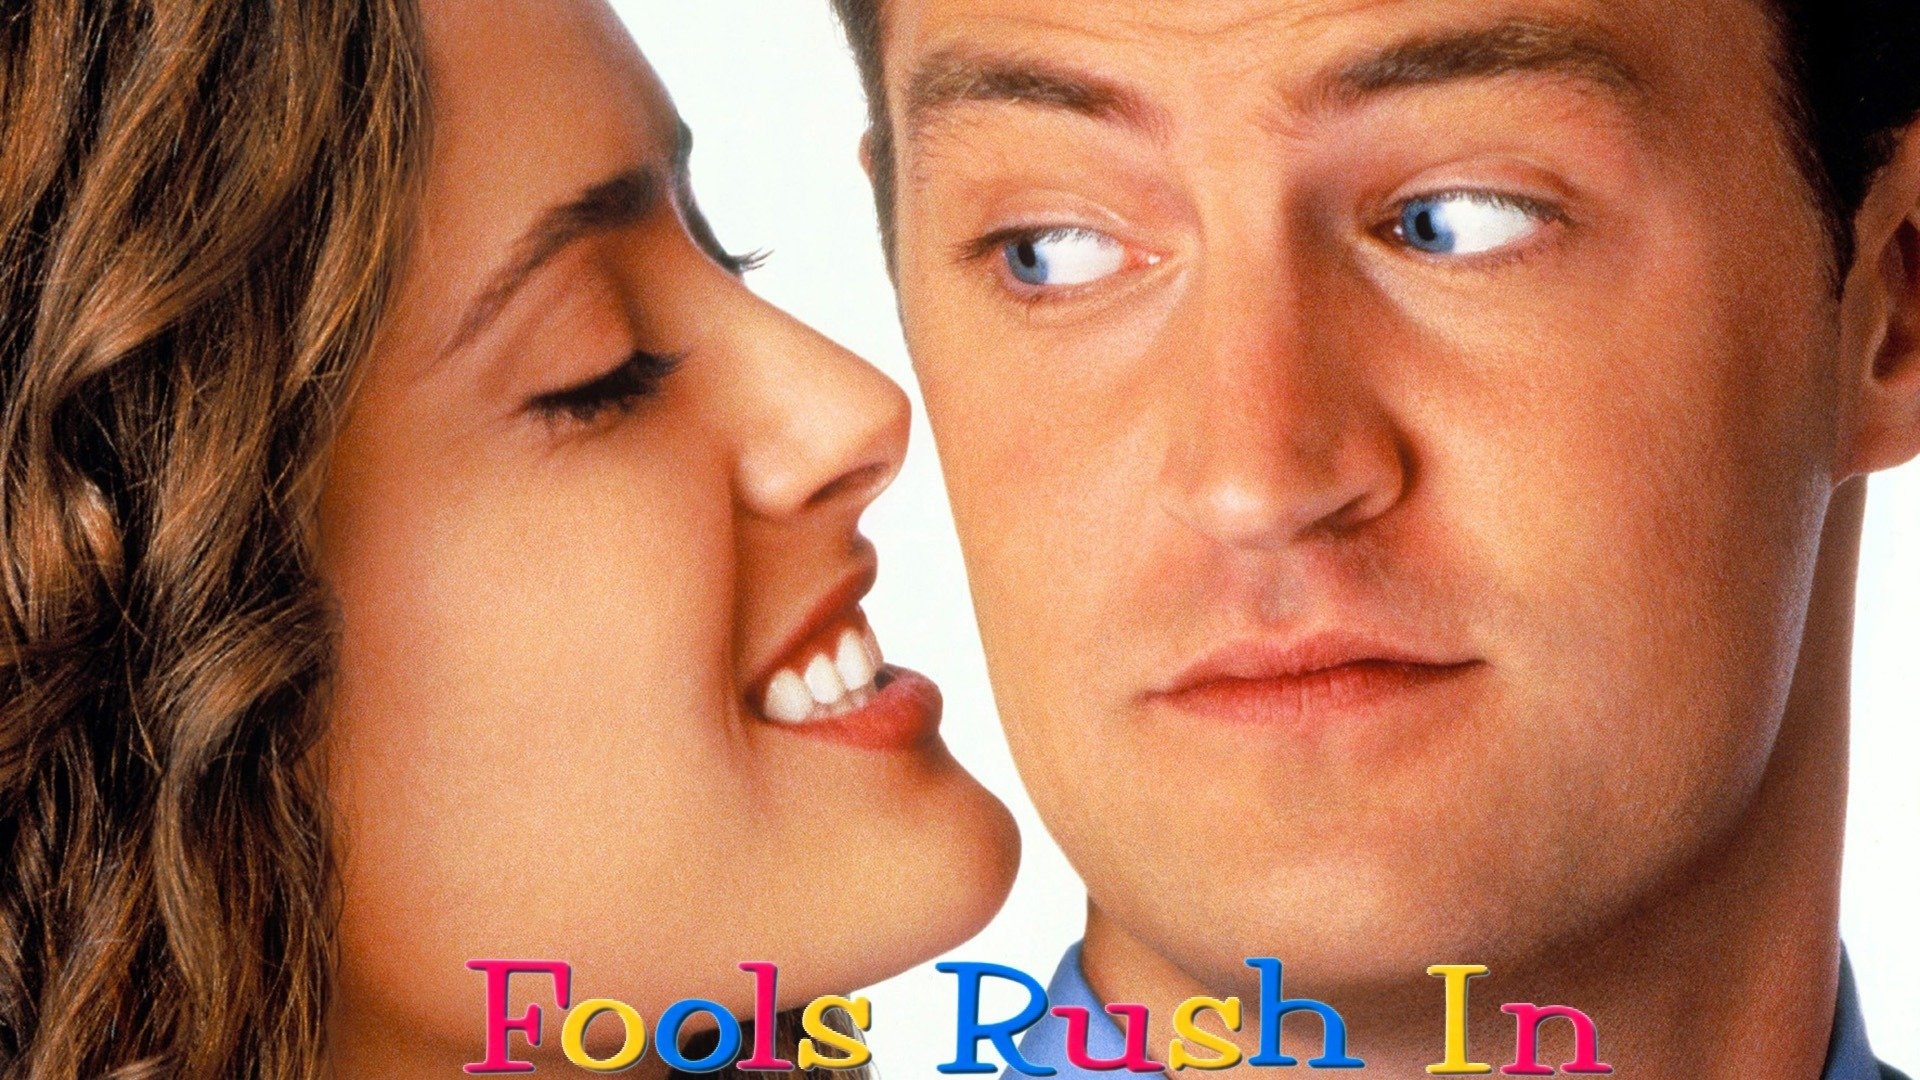 Fools Rush In (Movie): A 1997 American romantic comedy film, directed by Andy Tennant. 1920x1080 Full HD Wallpaper.